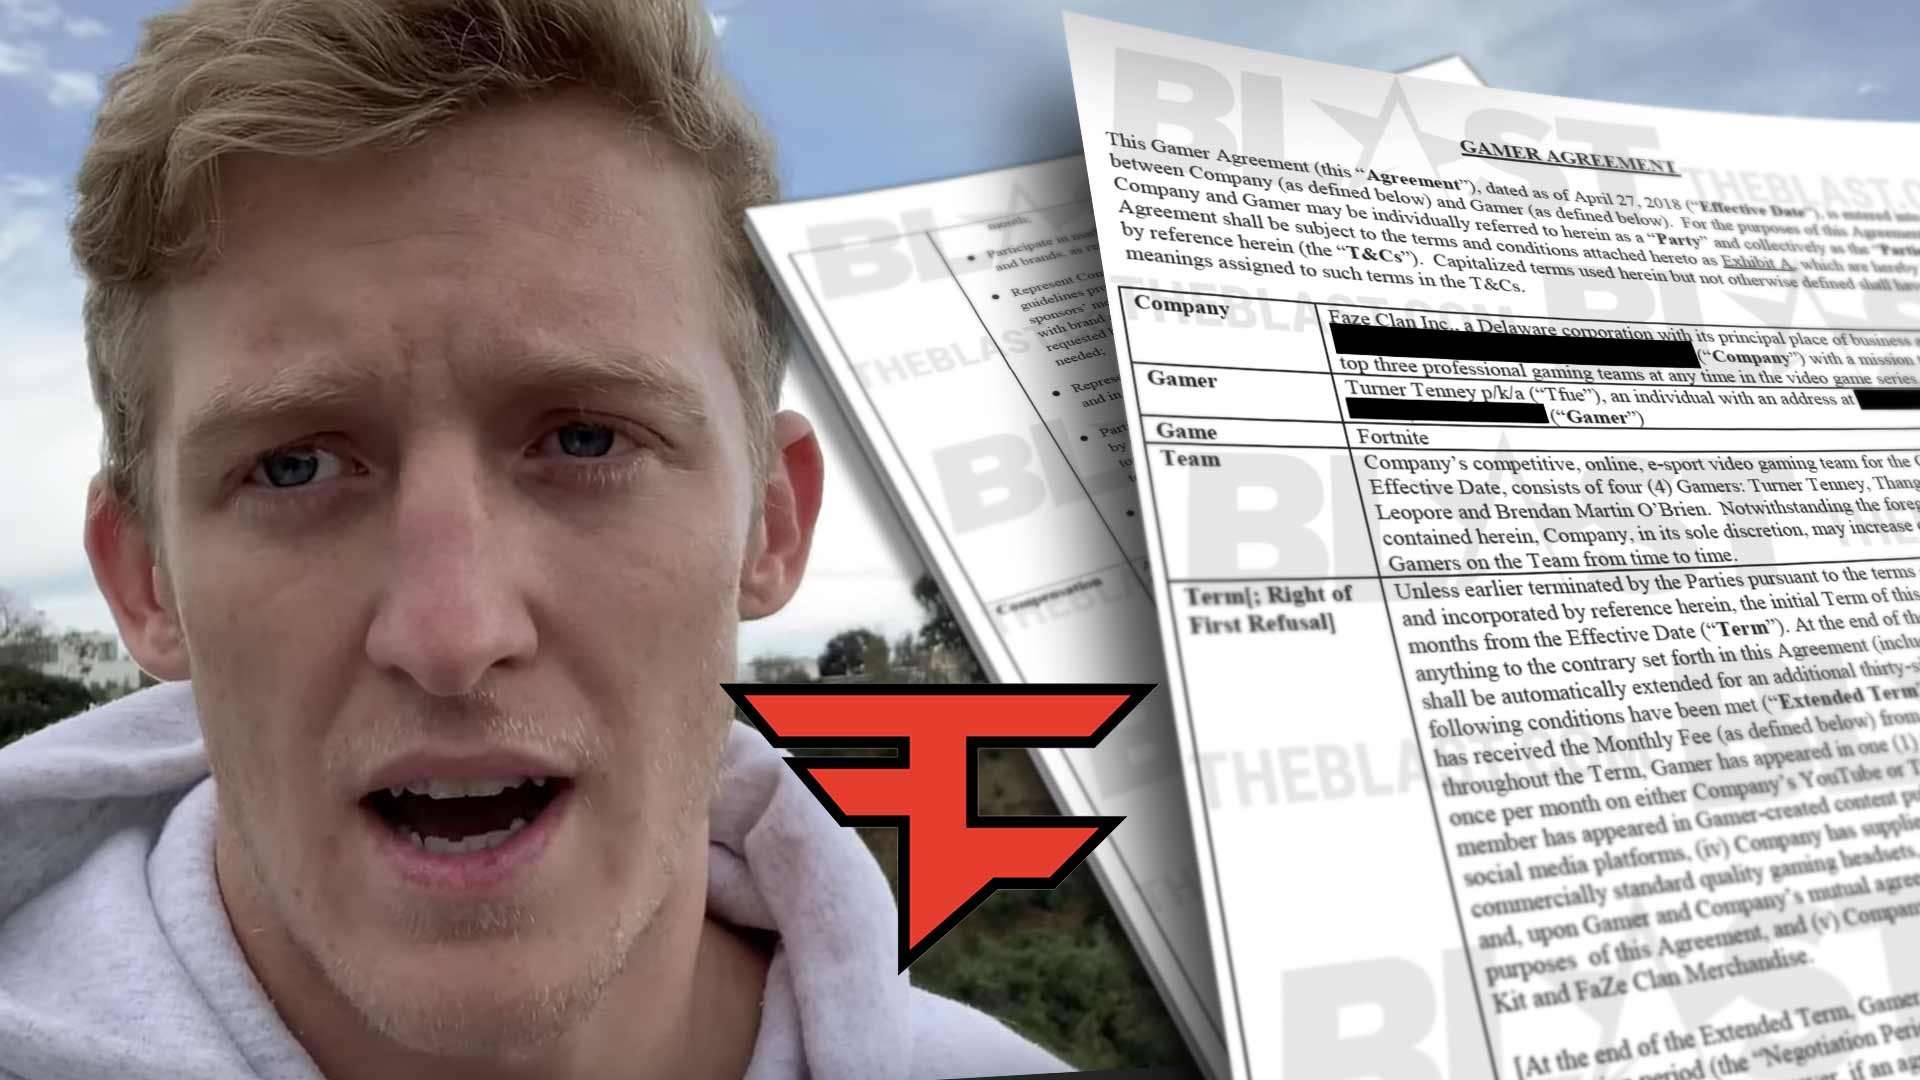 image for ‘Fortnite’ Gamer Tfue’s Contract with FaZe Clan Finally Revealed!